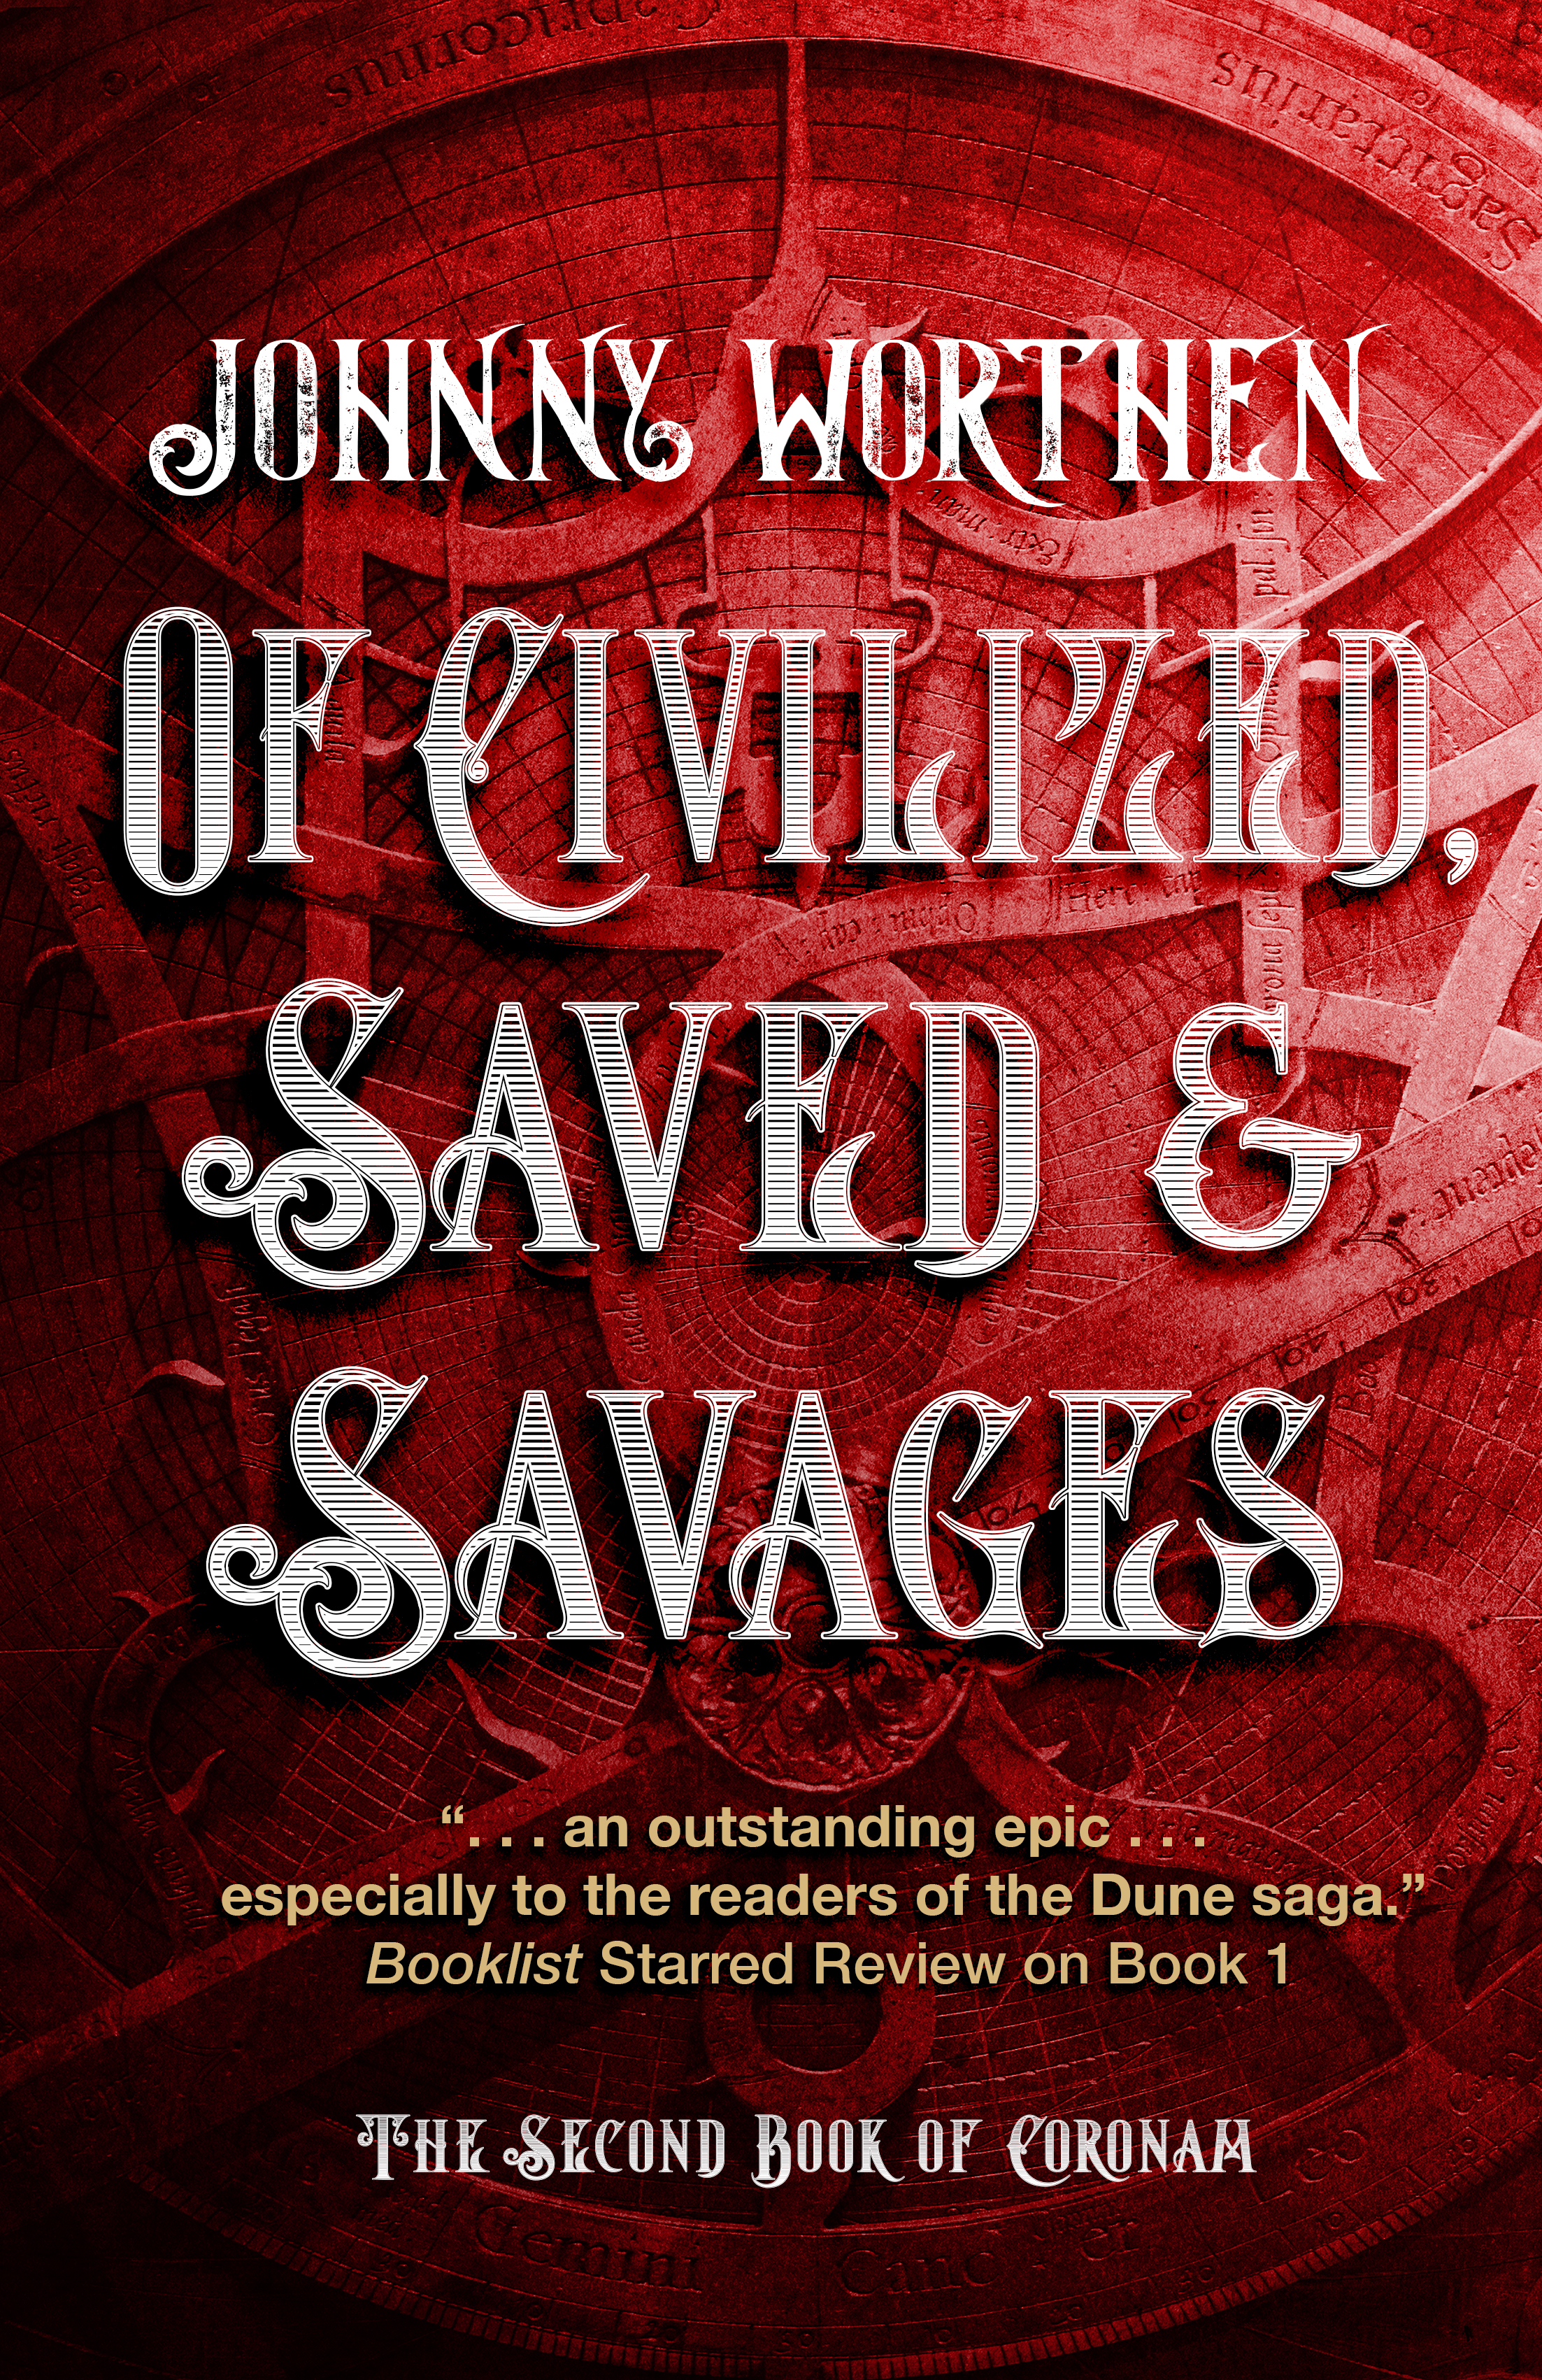 Of Civilzed, Saved and Savages